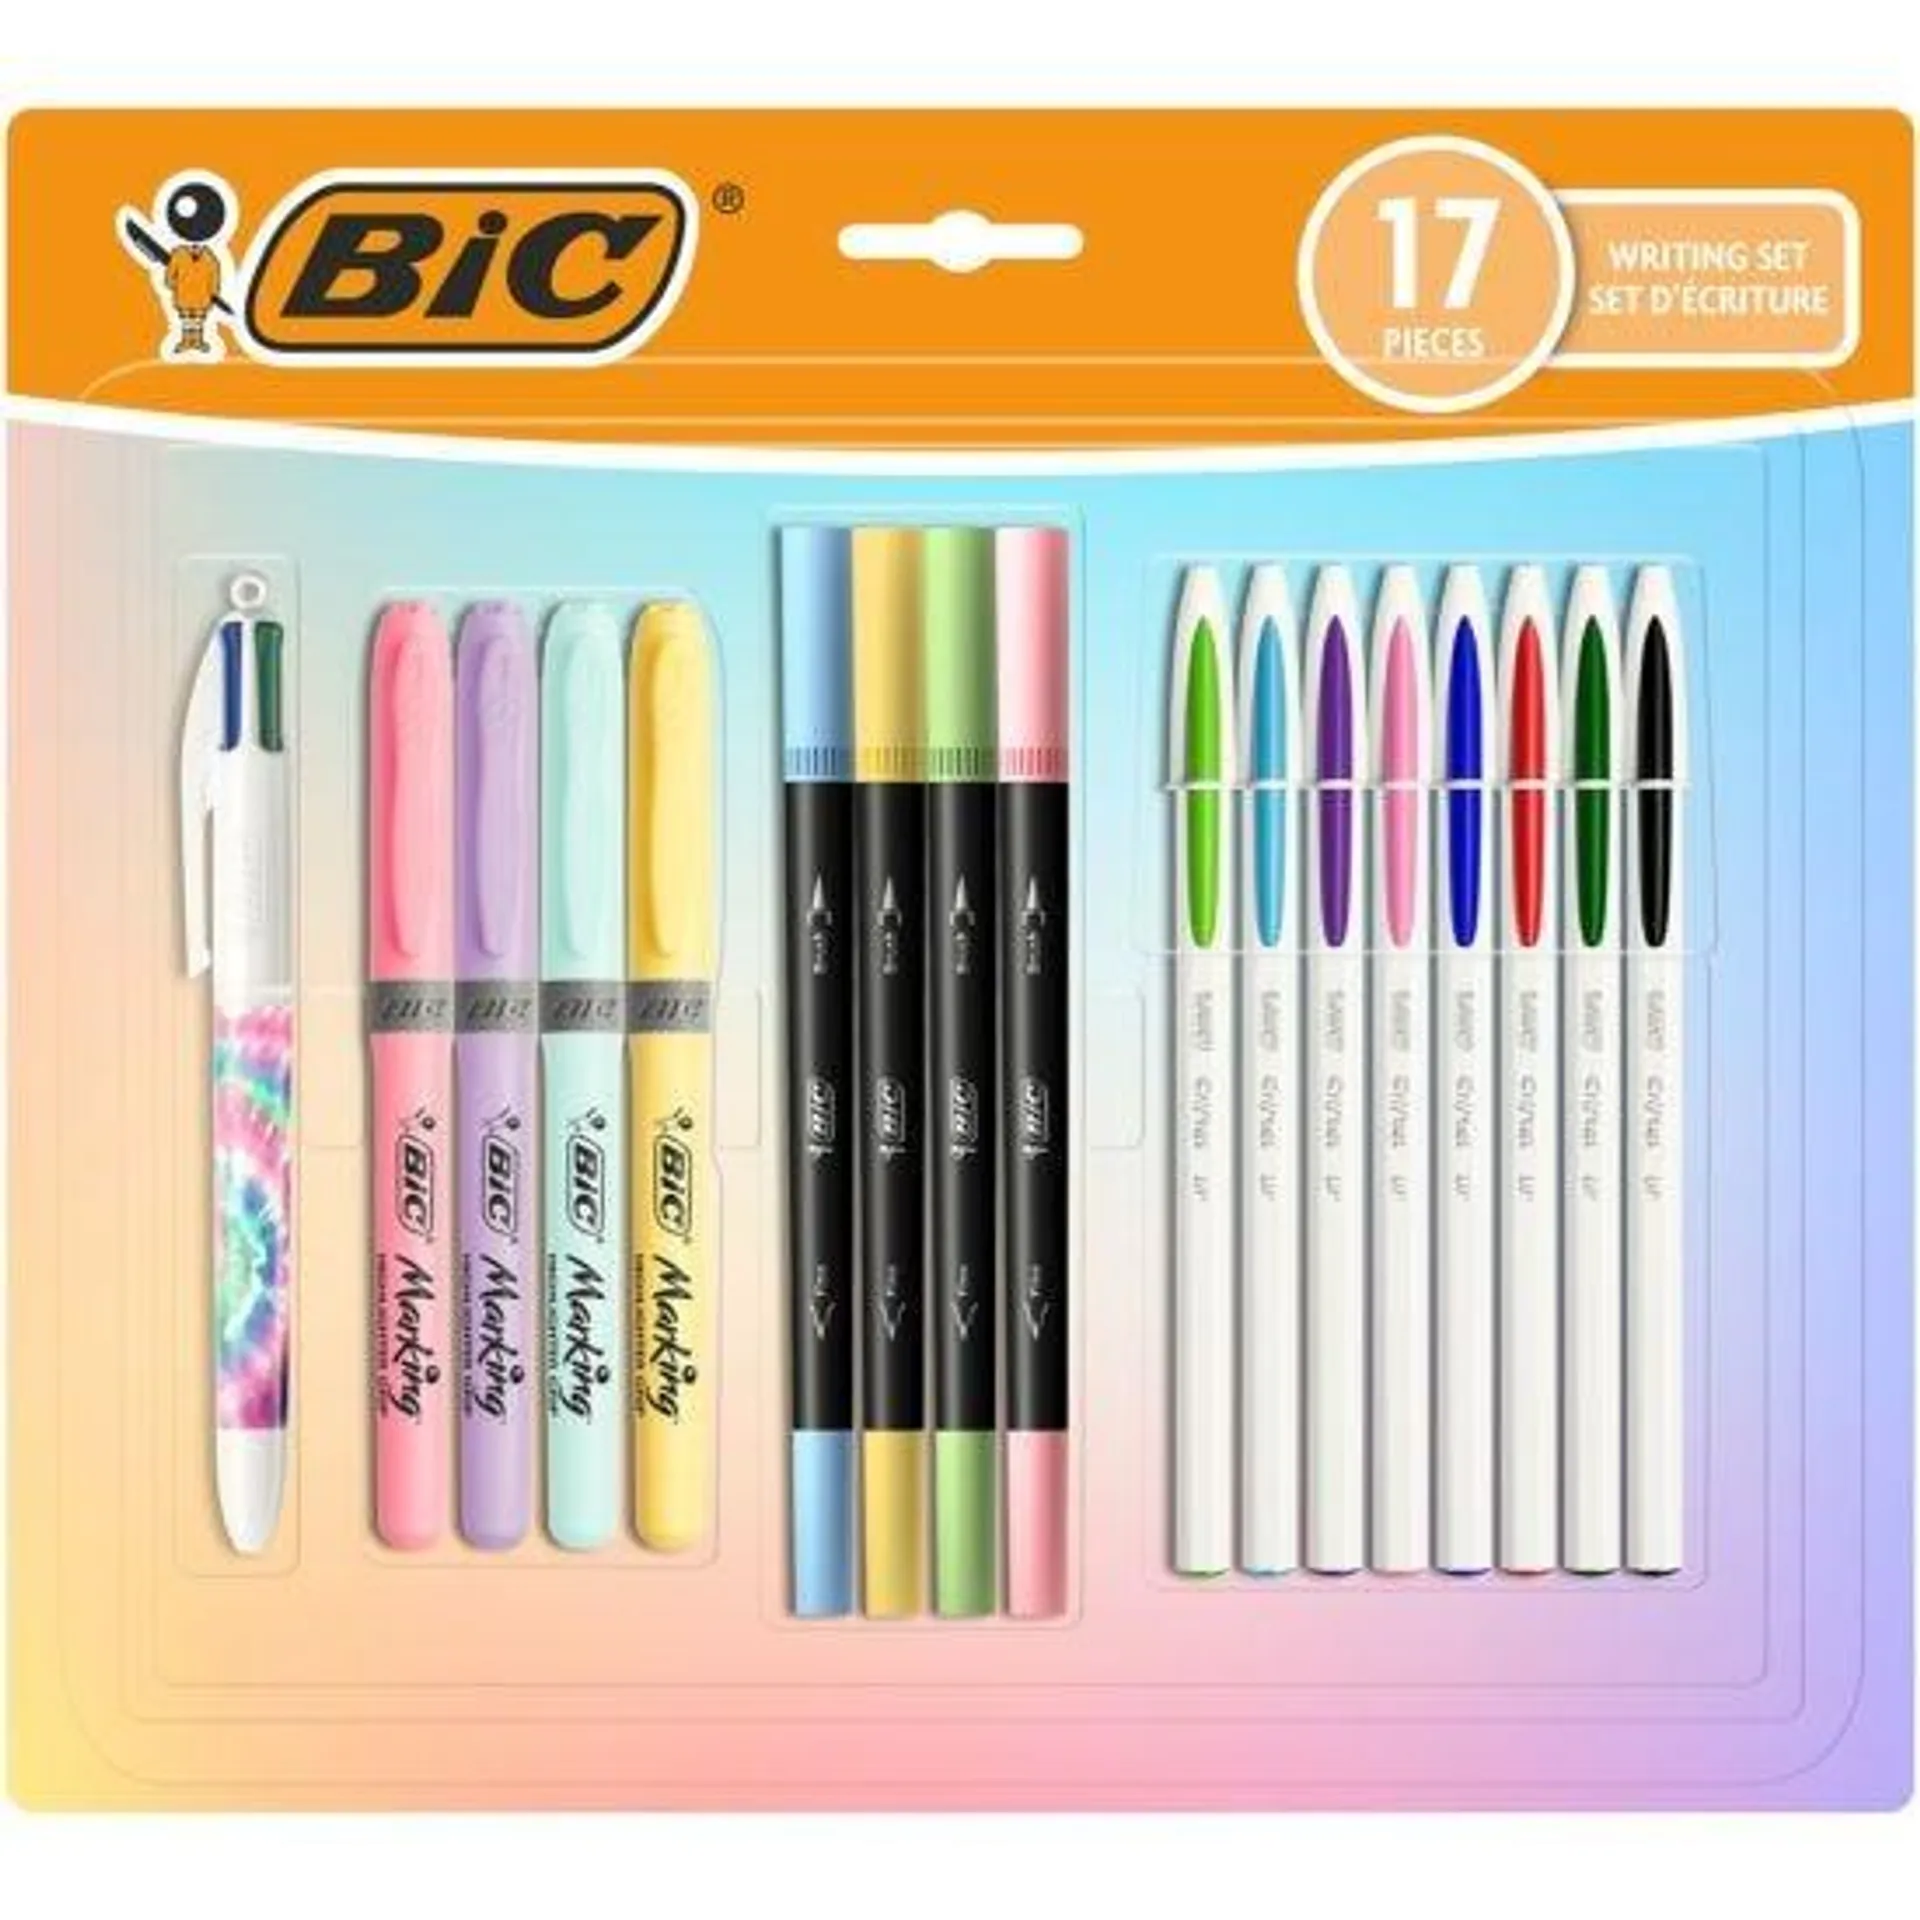 BiC Mixed Pastel Writing Pack 17 Pieces